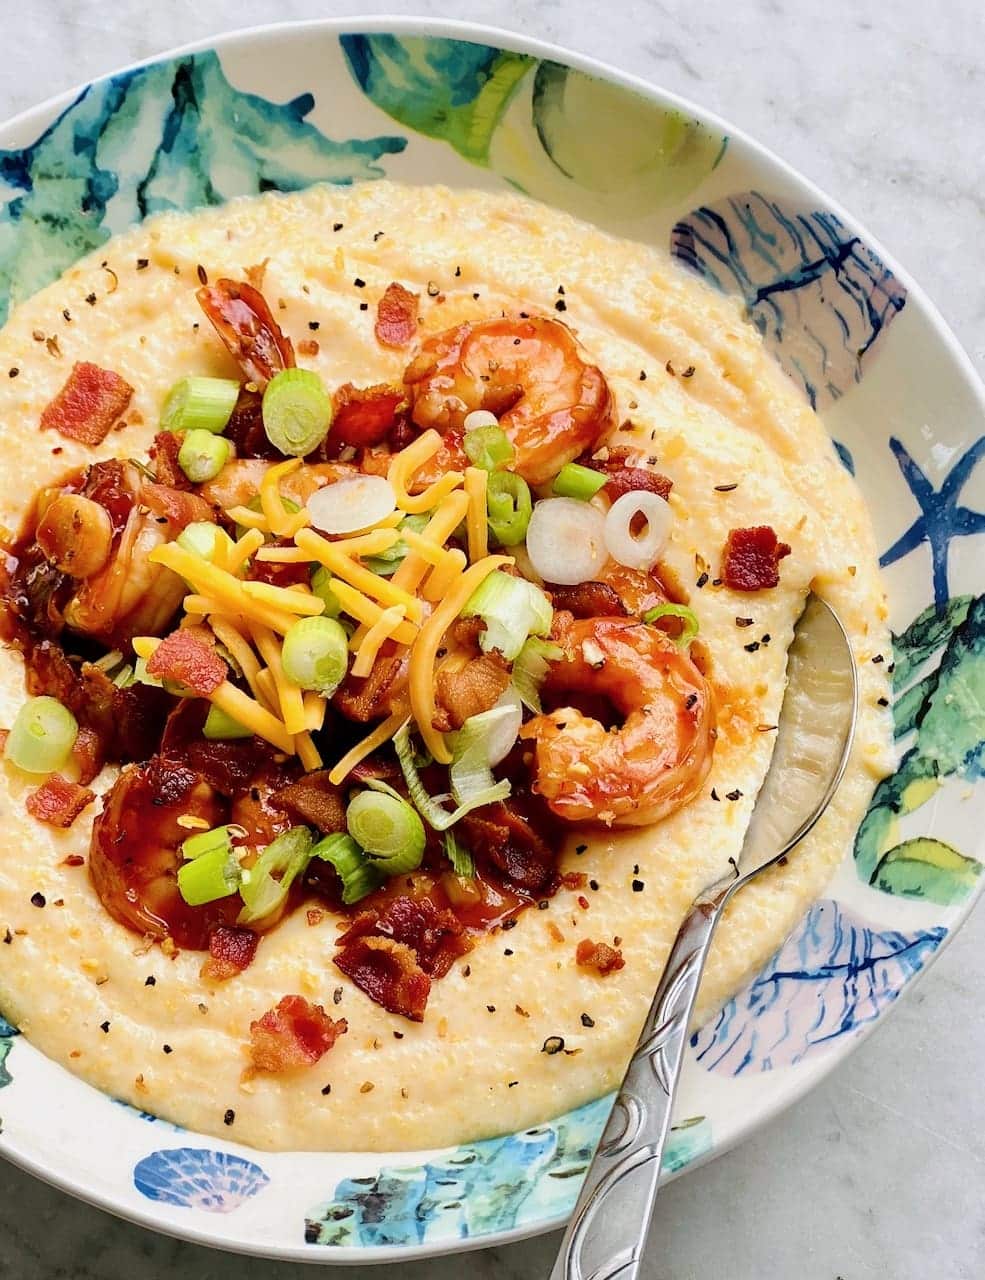 Southern shrimp and grits with scallions and cheese in a decorative bowl.